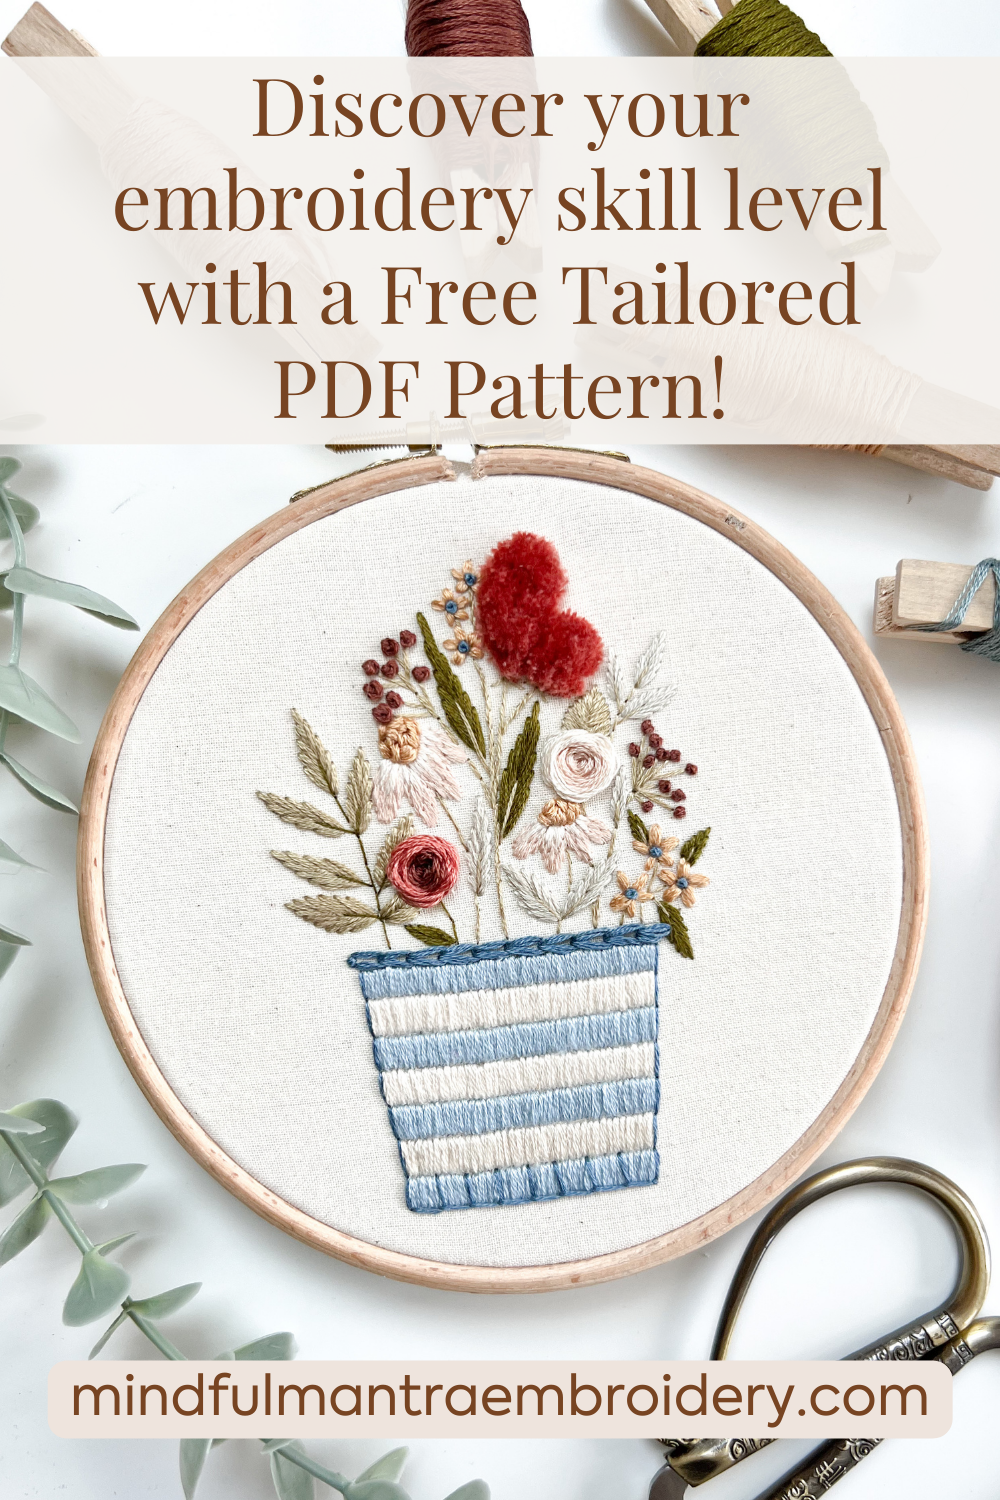 Discover your embroidery skill level with a Free Tailored PDF Pattern!